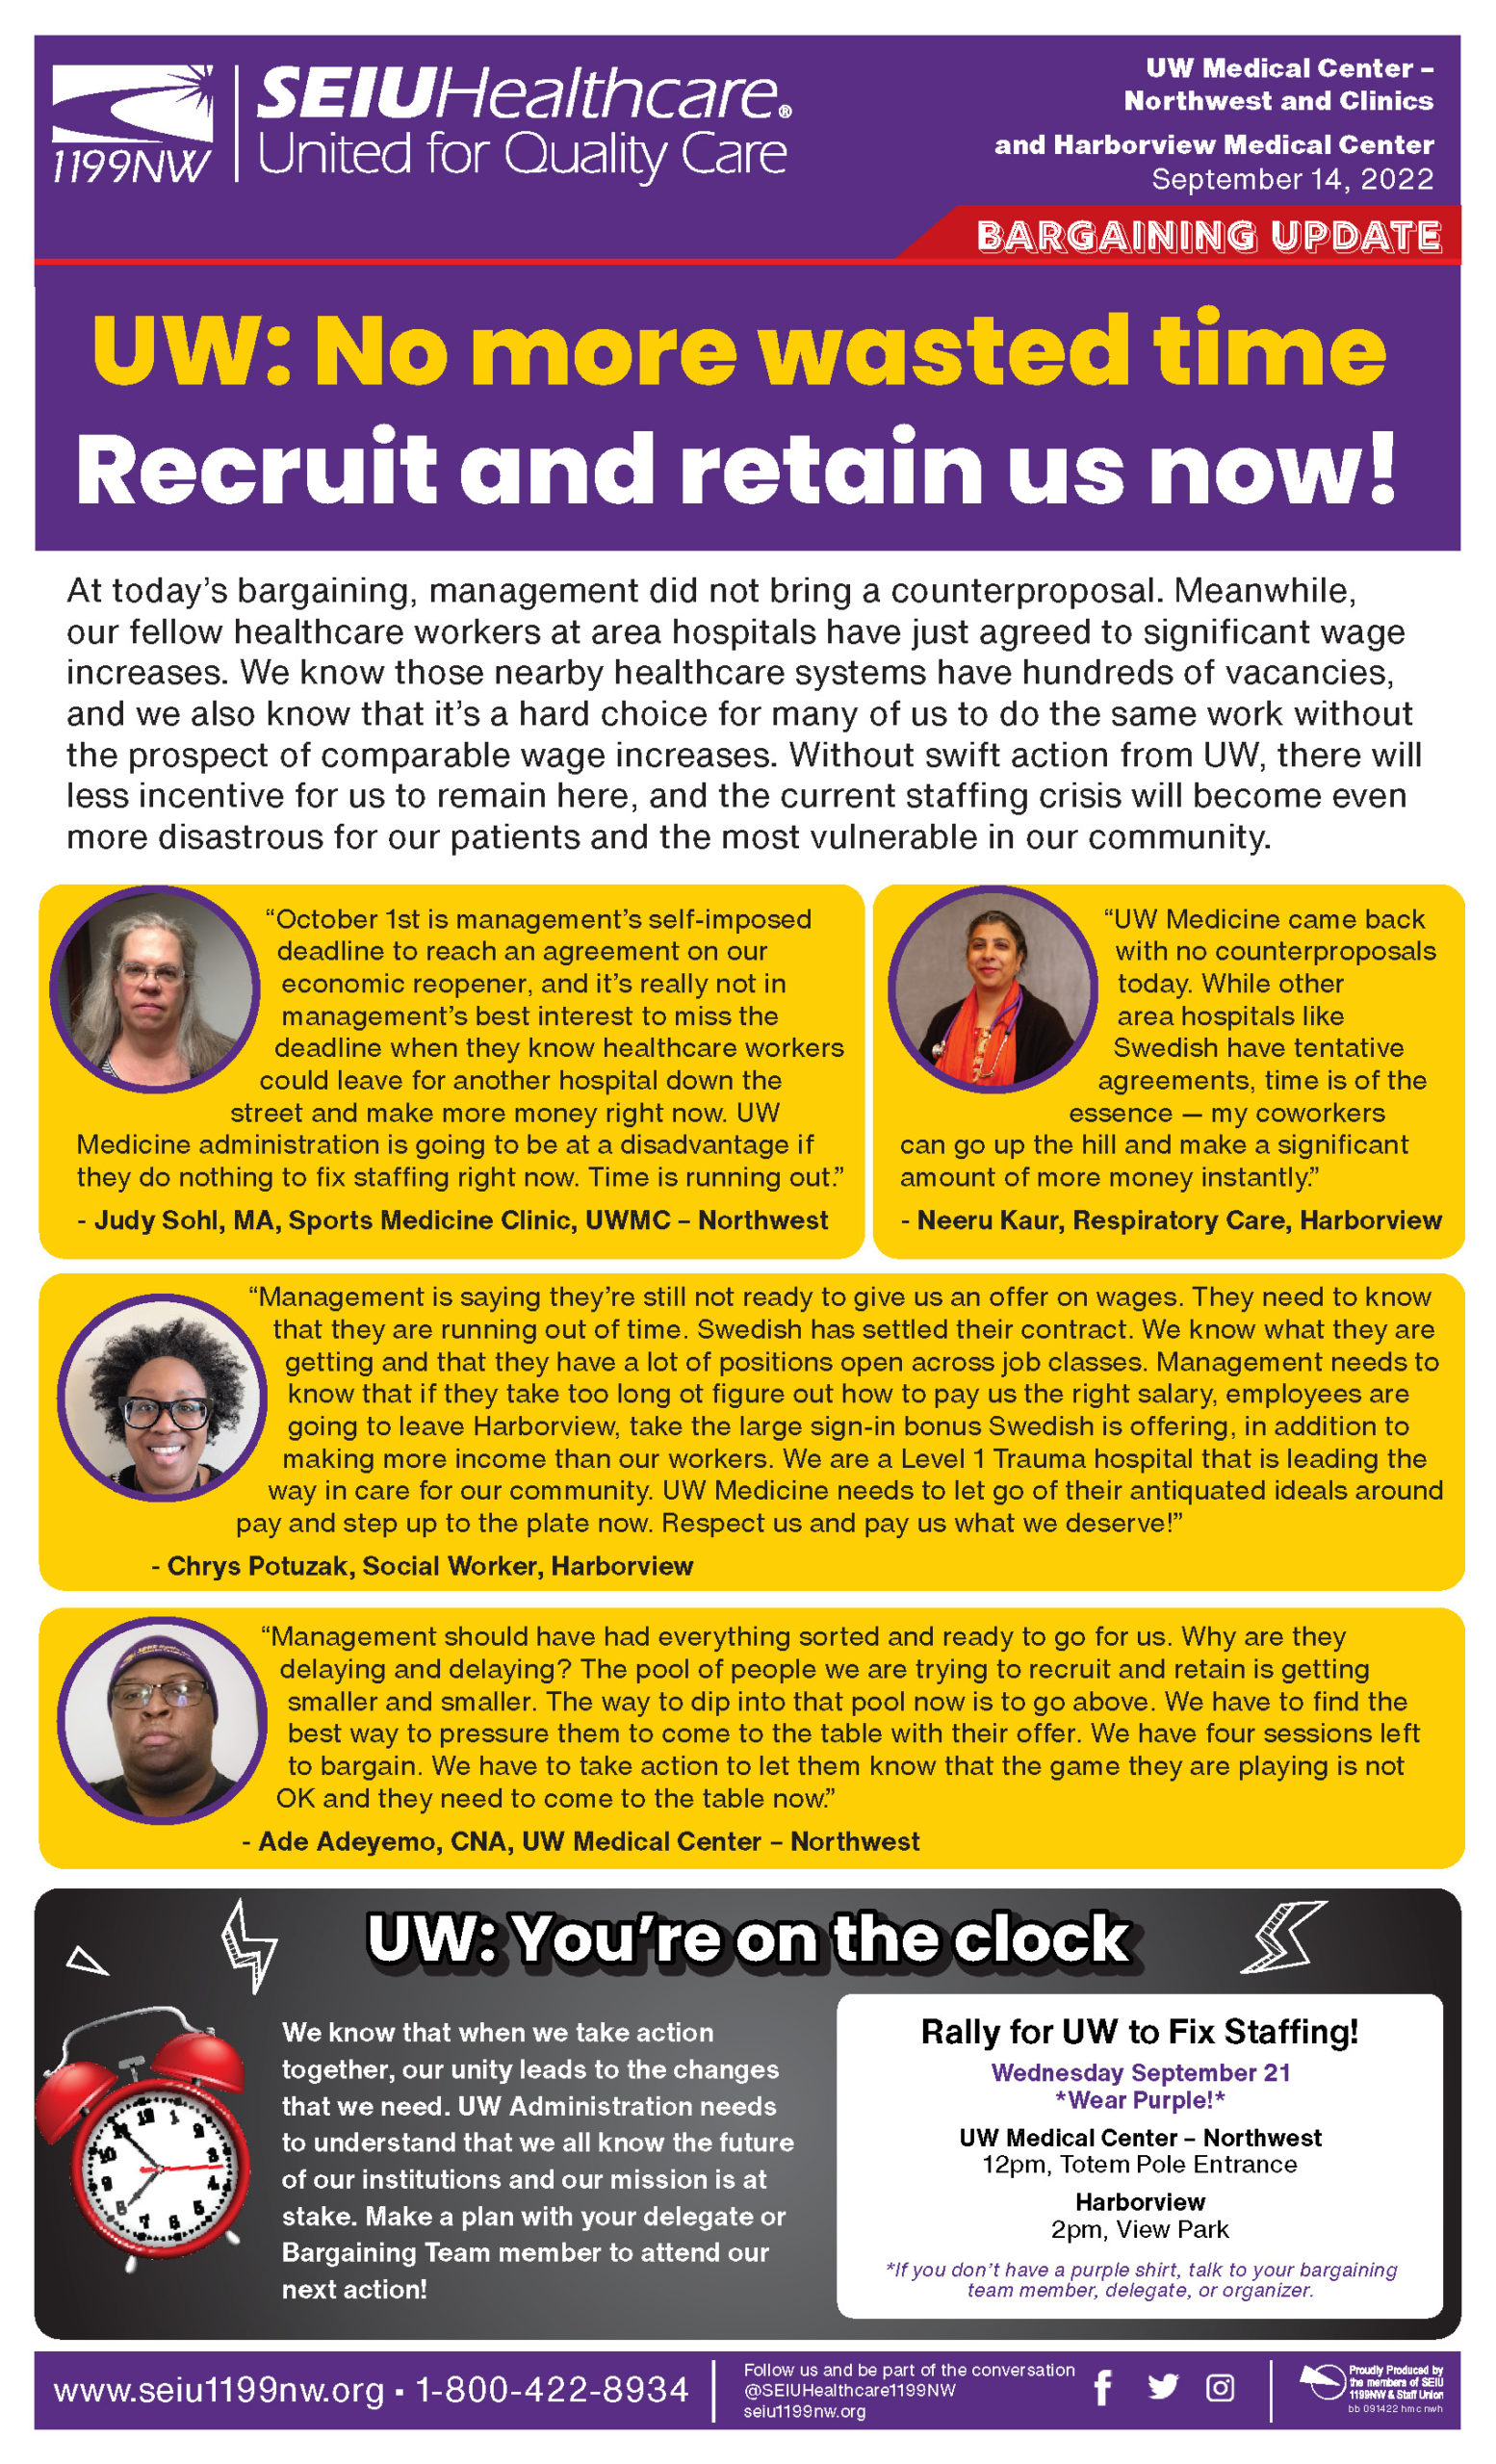 UW: No more wasted time. Recruit and retain us now!